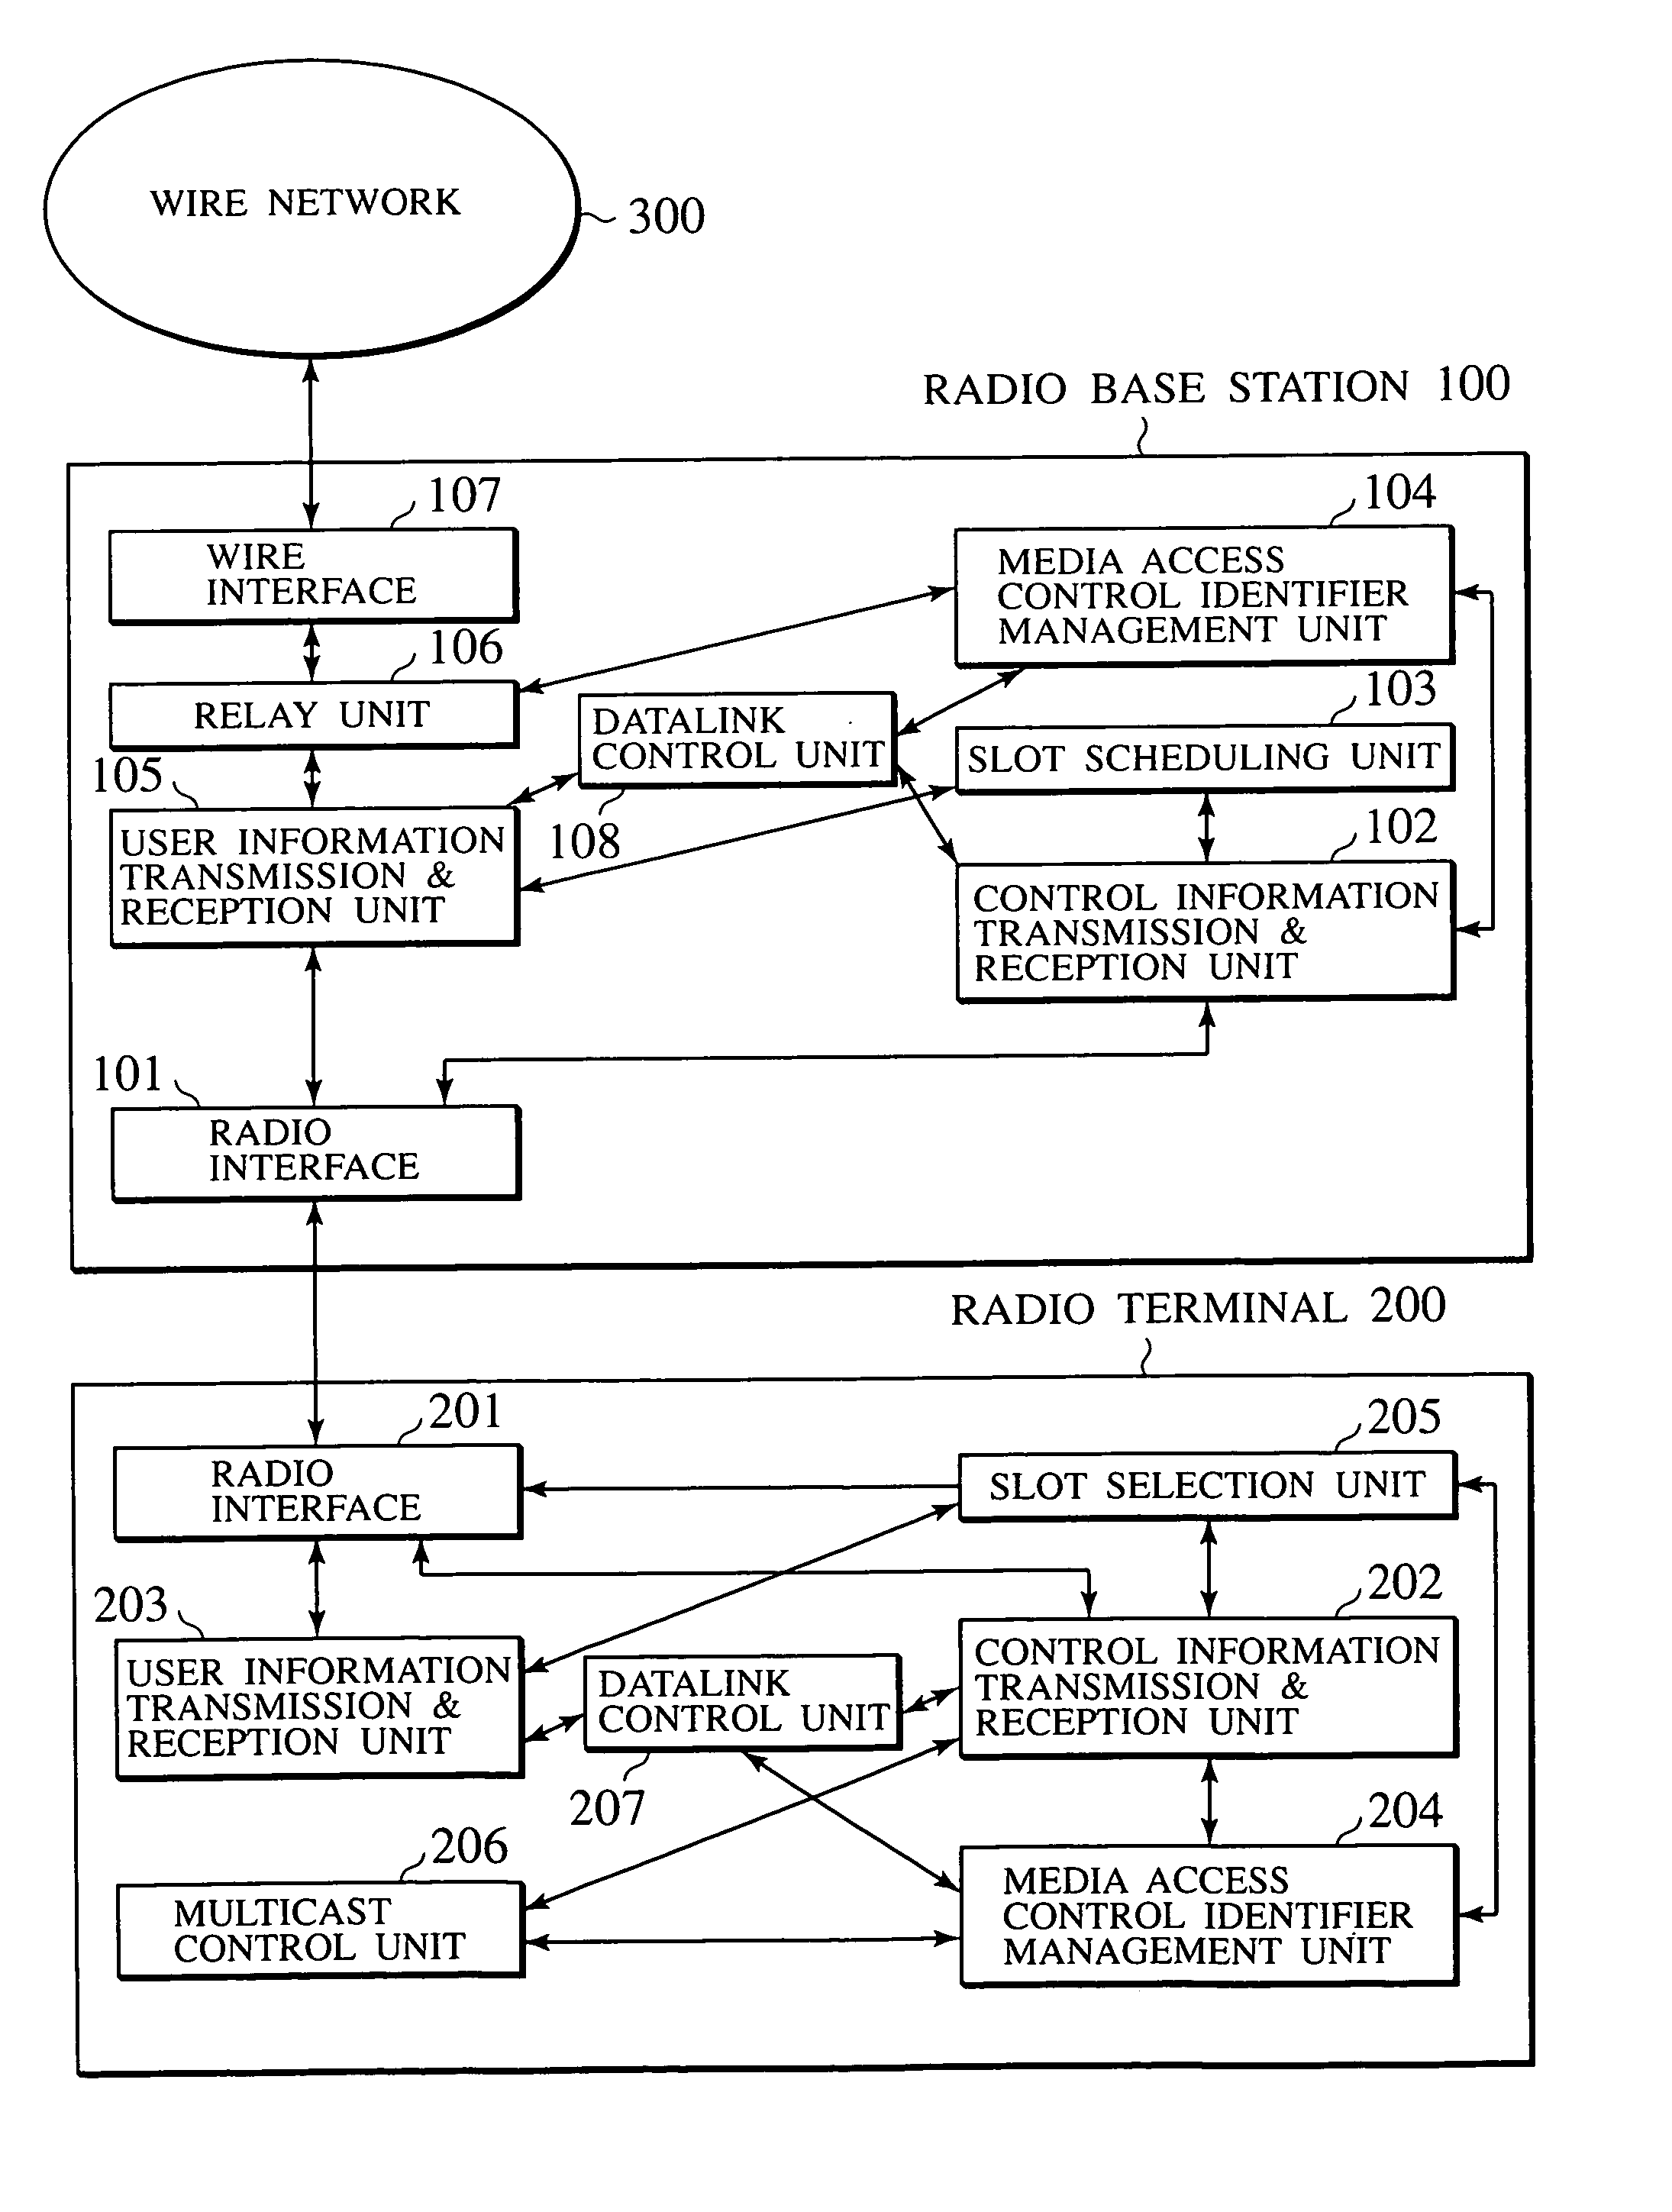 Radio communication system using point-to-point and point-to-multipoint user information communications